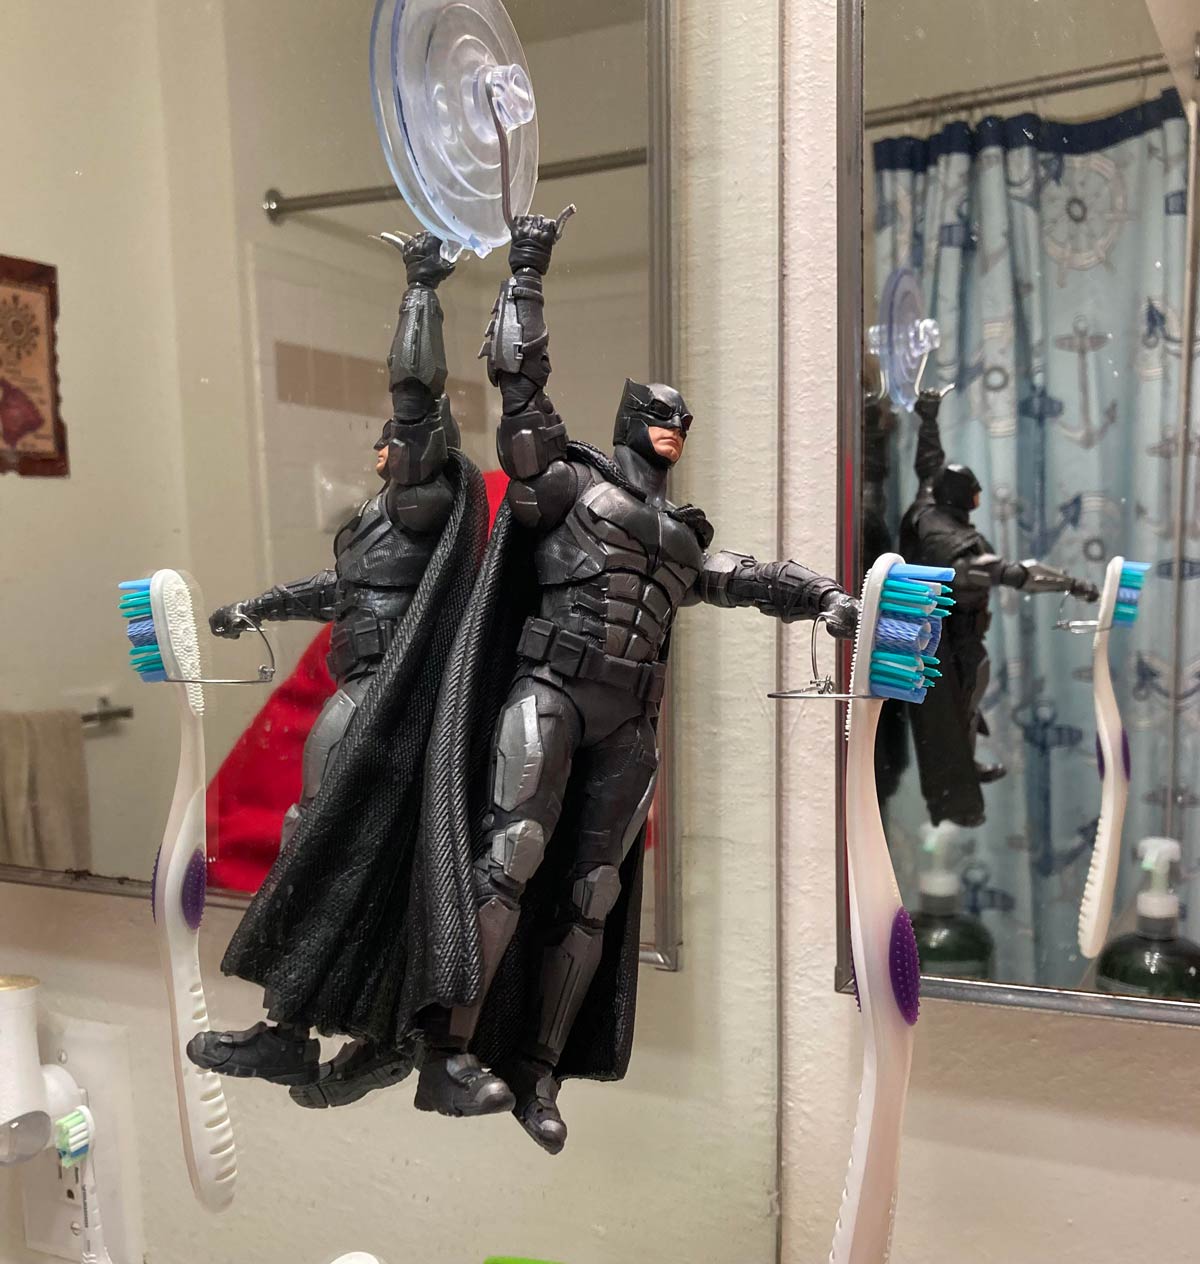 I made my roommate a Batman toothbrush holder